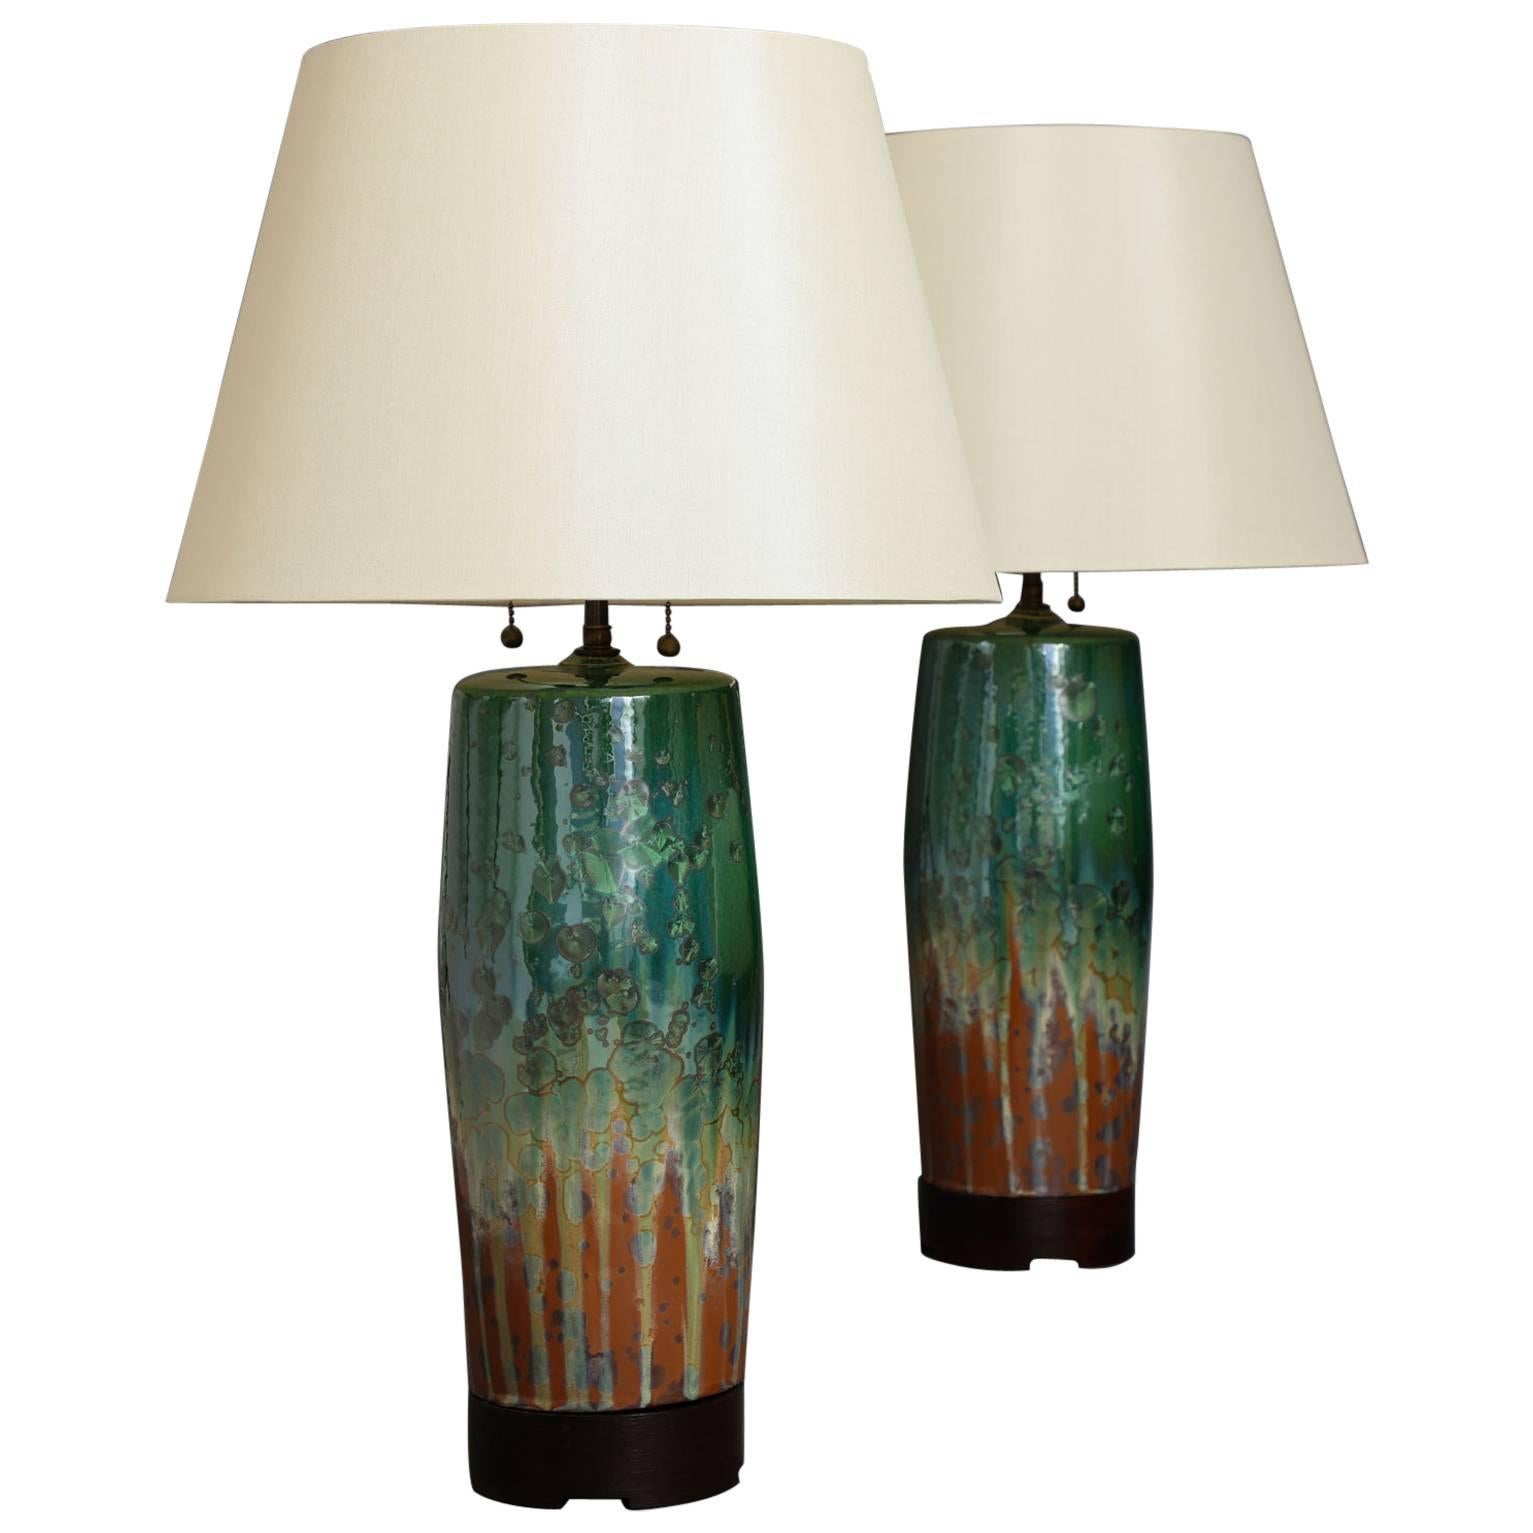 Large Green Ceramic Lamps by SCDS